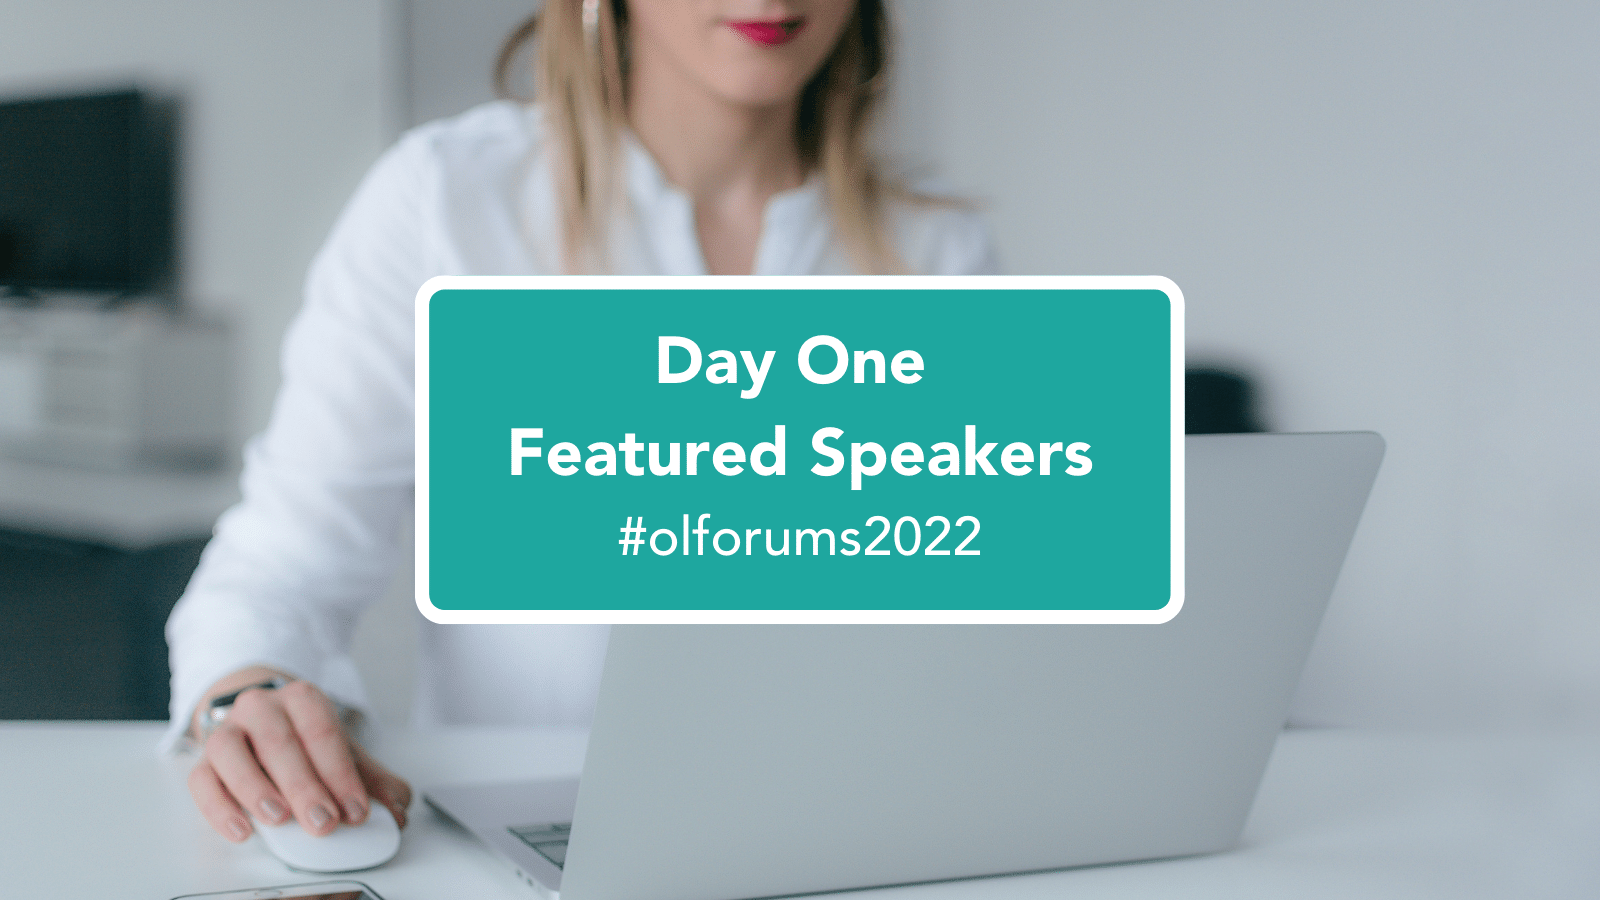 Featured Speakers at the Virtual #OLForums2022 [Day One]